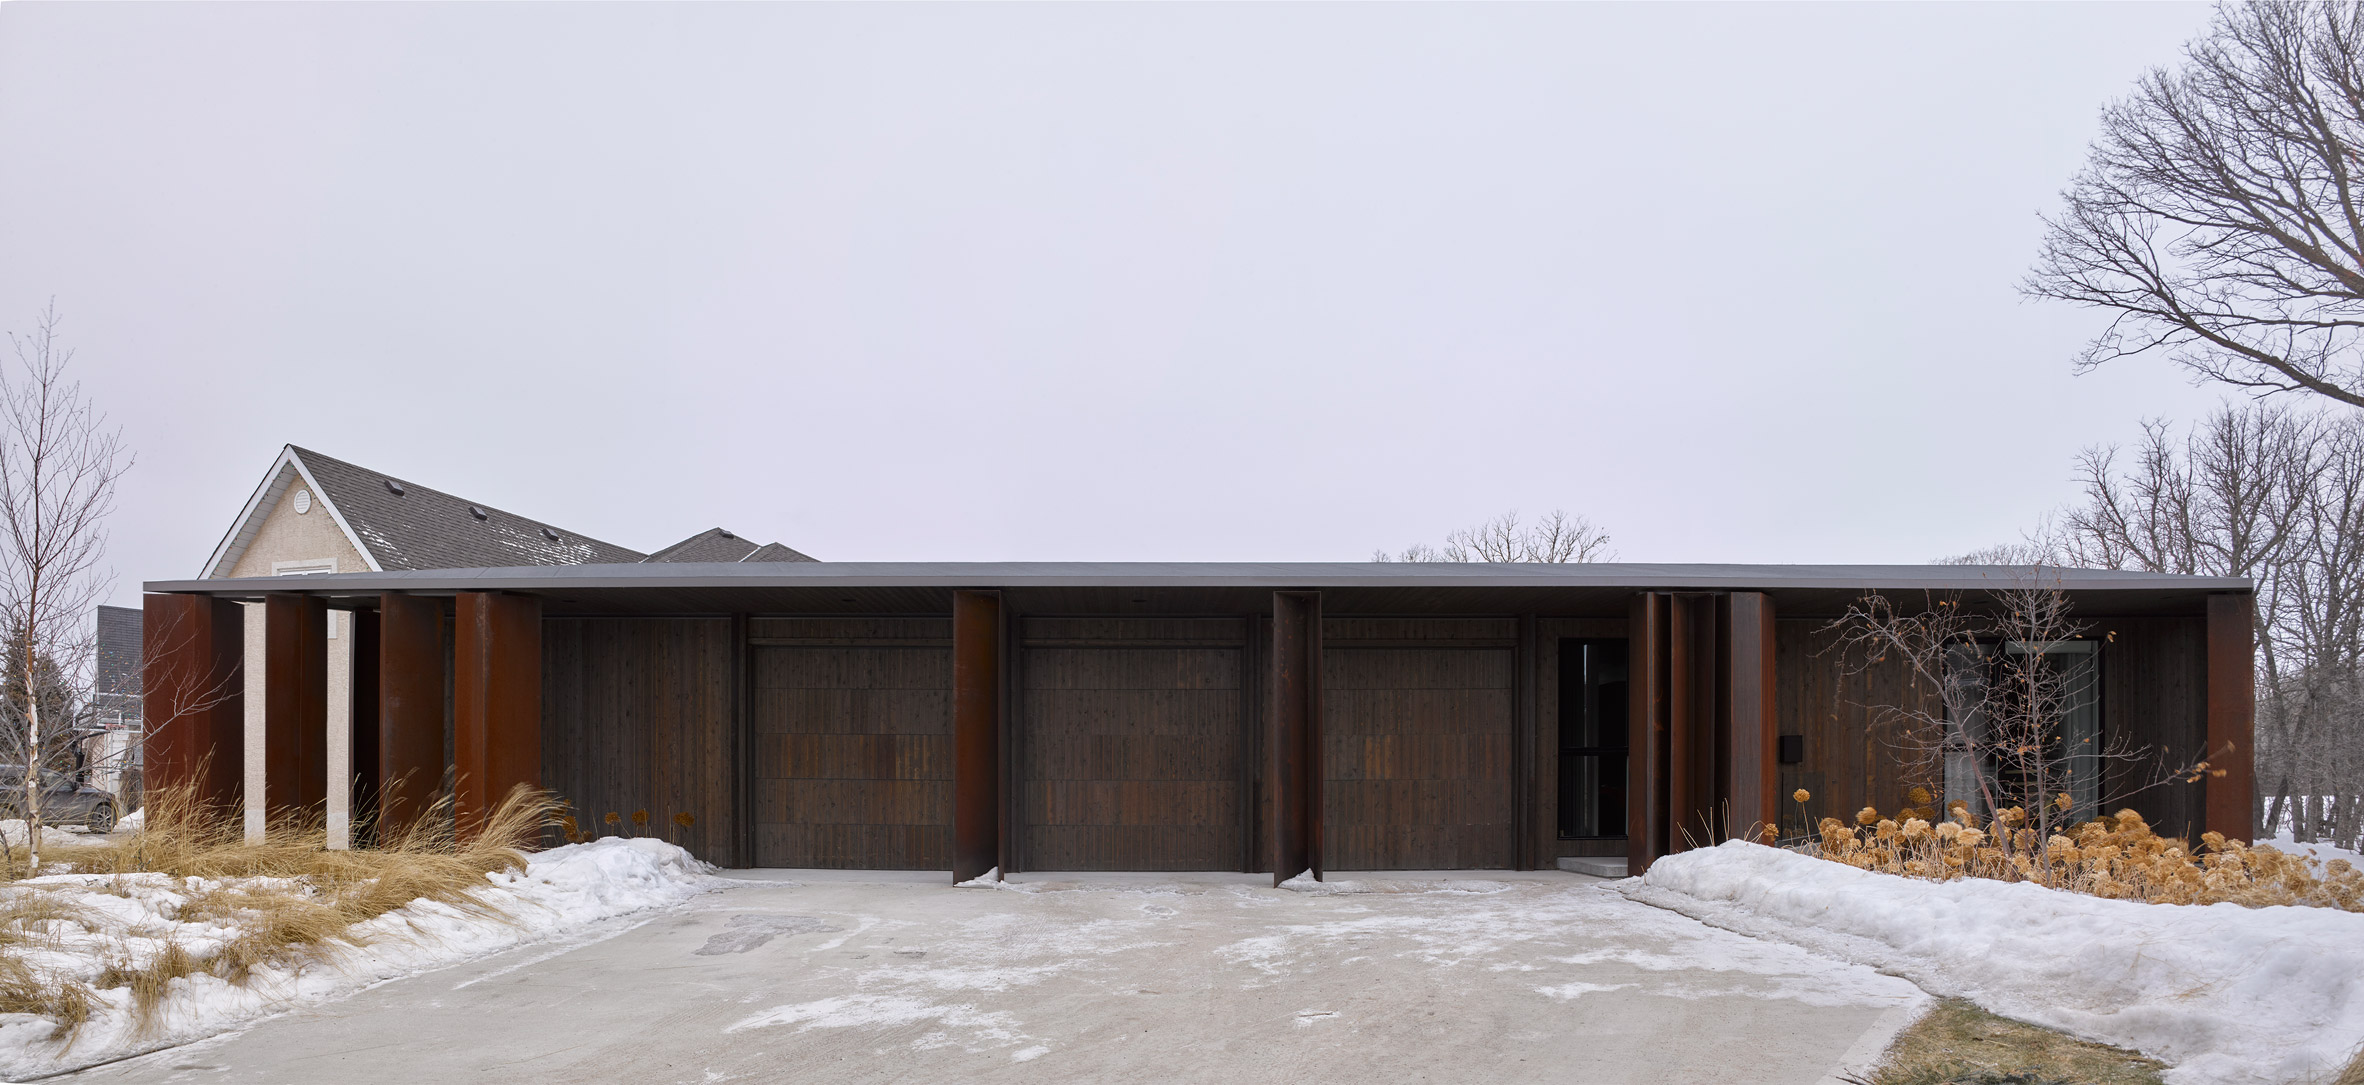 Parallelogram House in Winnipeg is named after its unusual shape Free